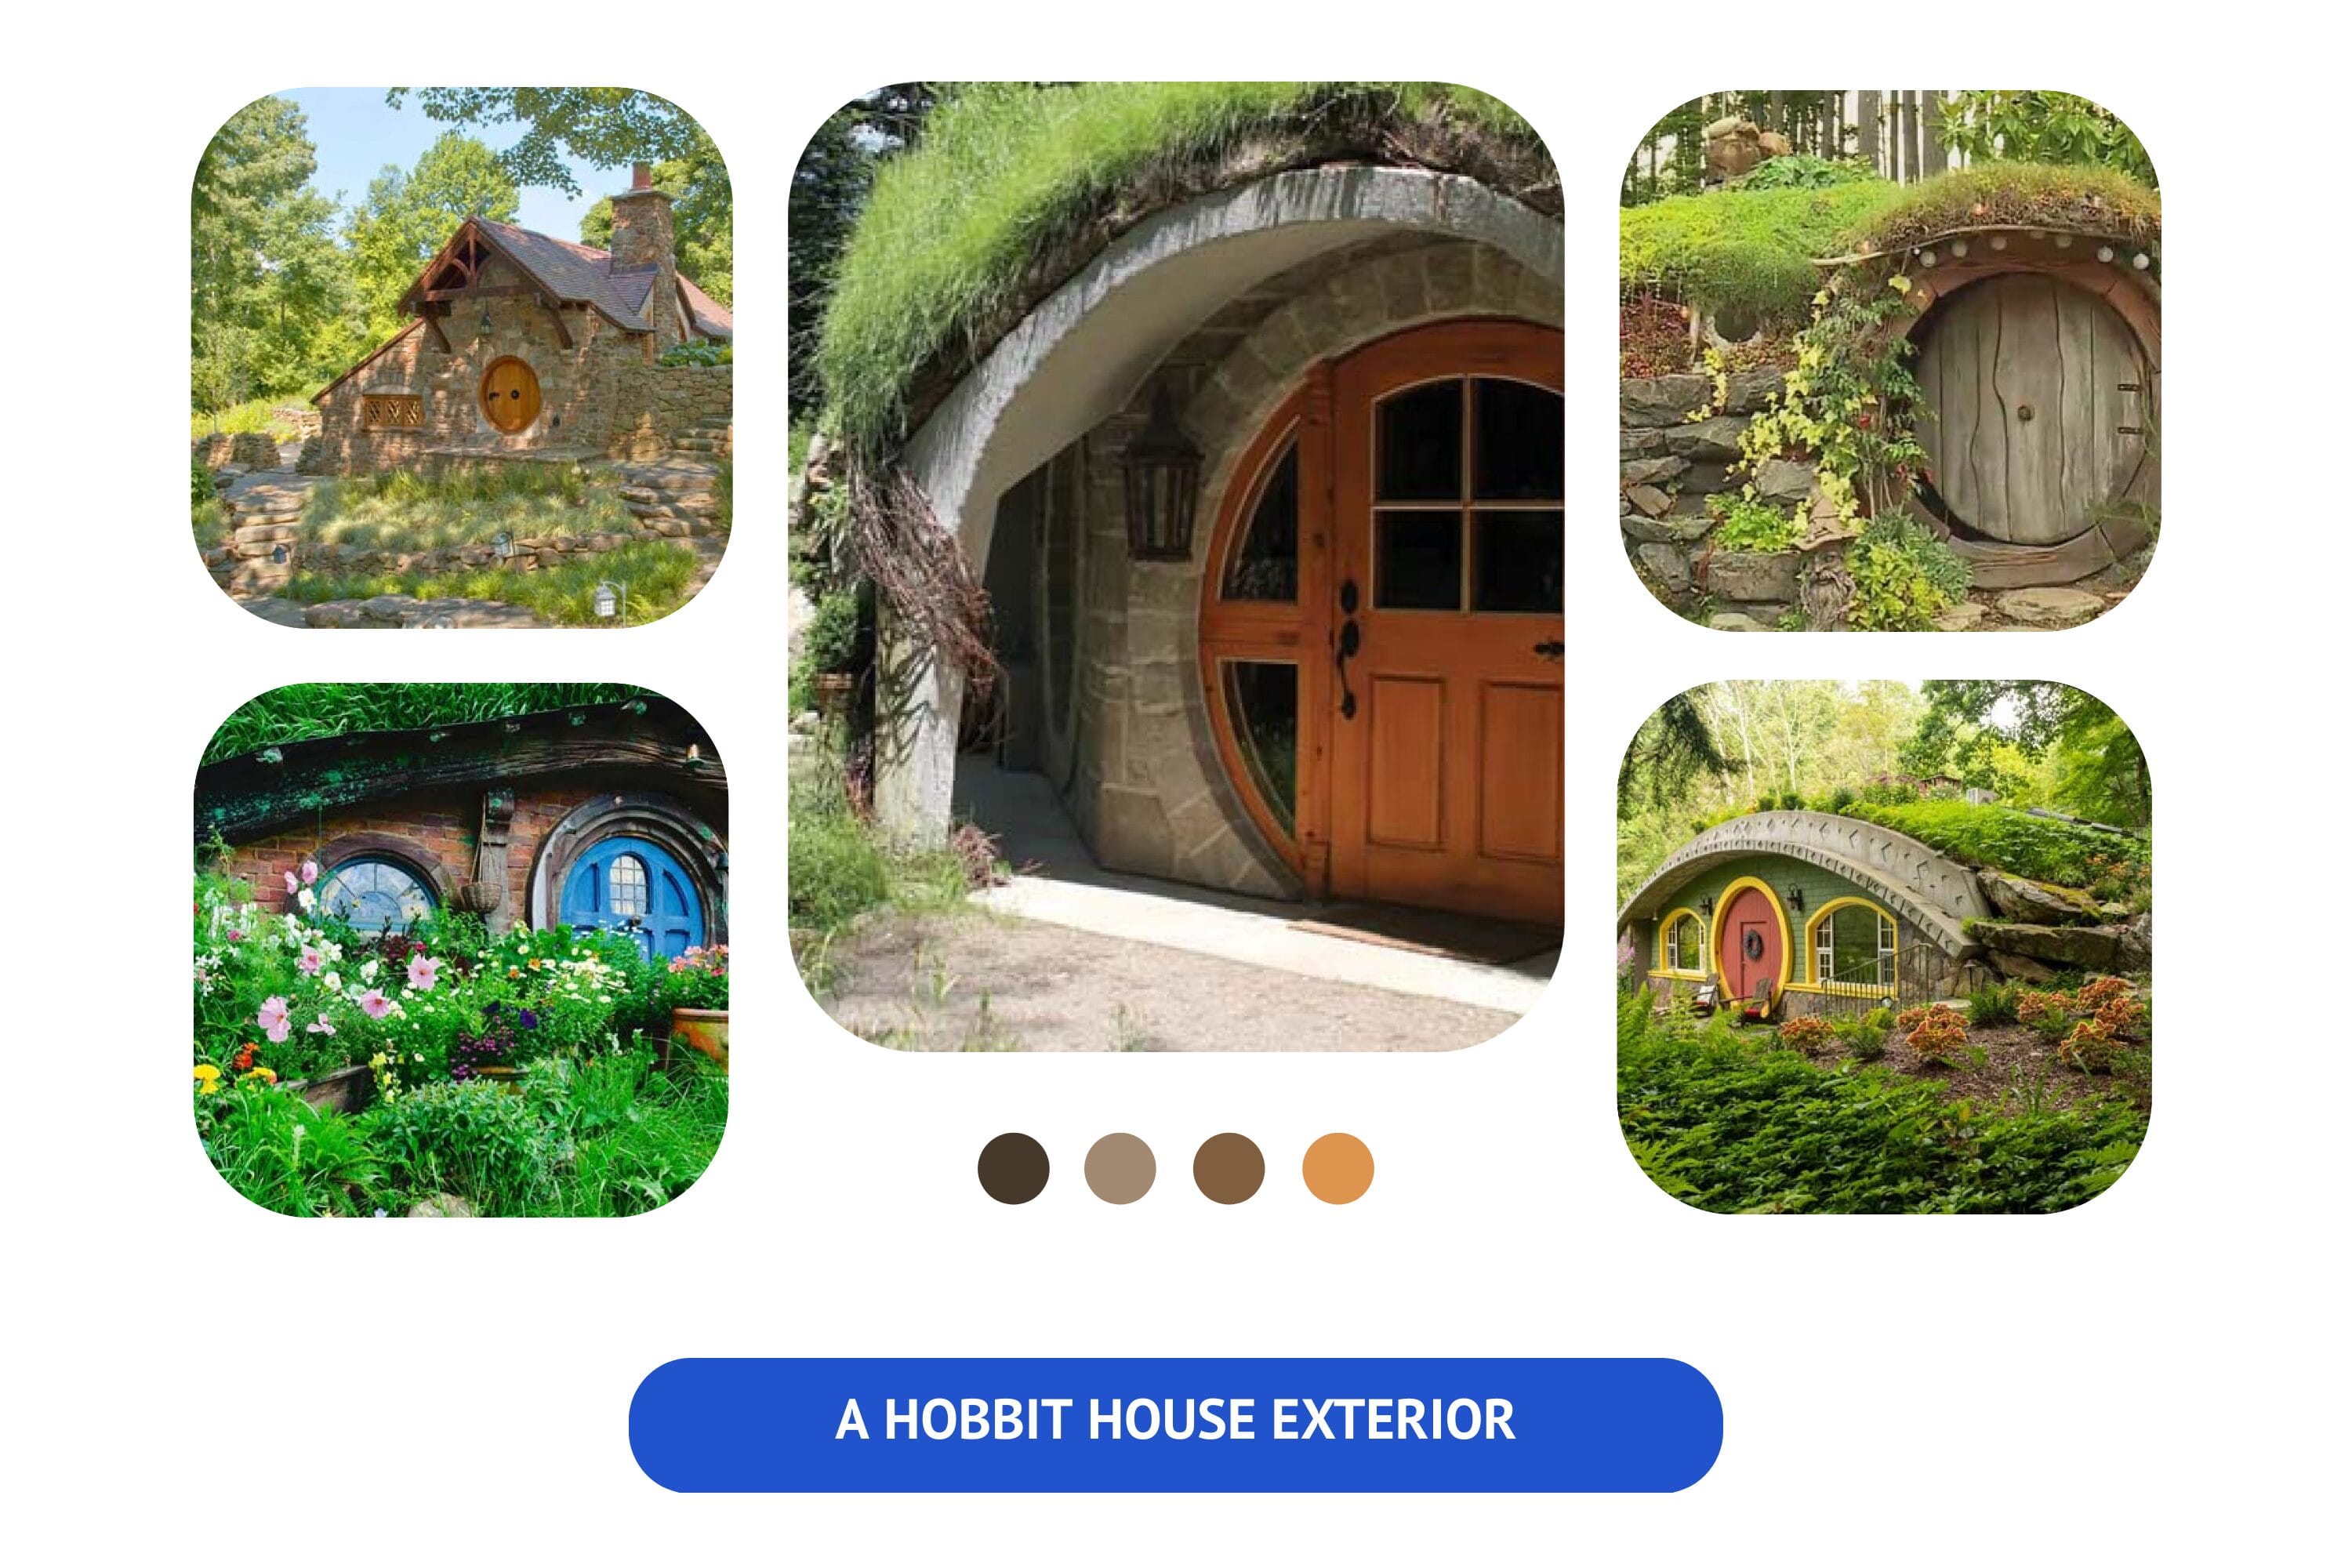 The outlook of a hobbit house.